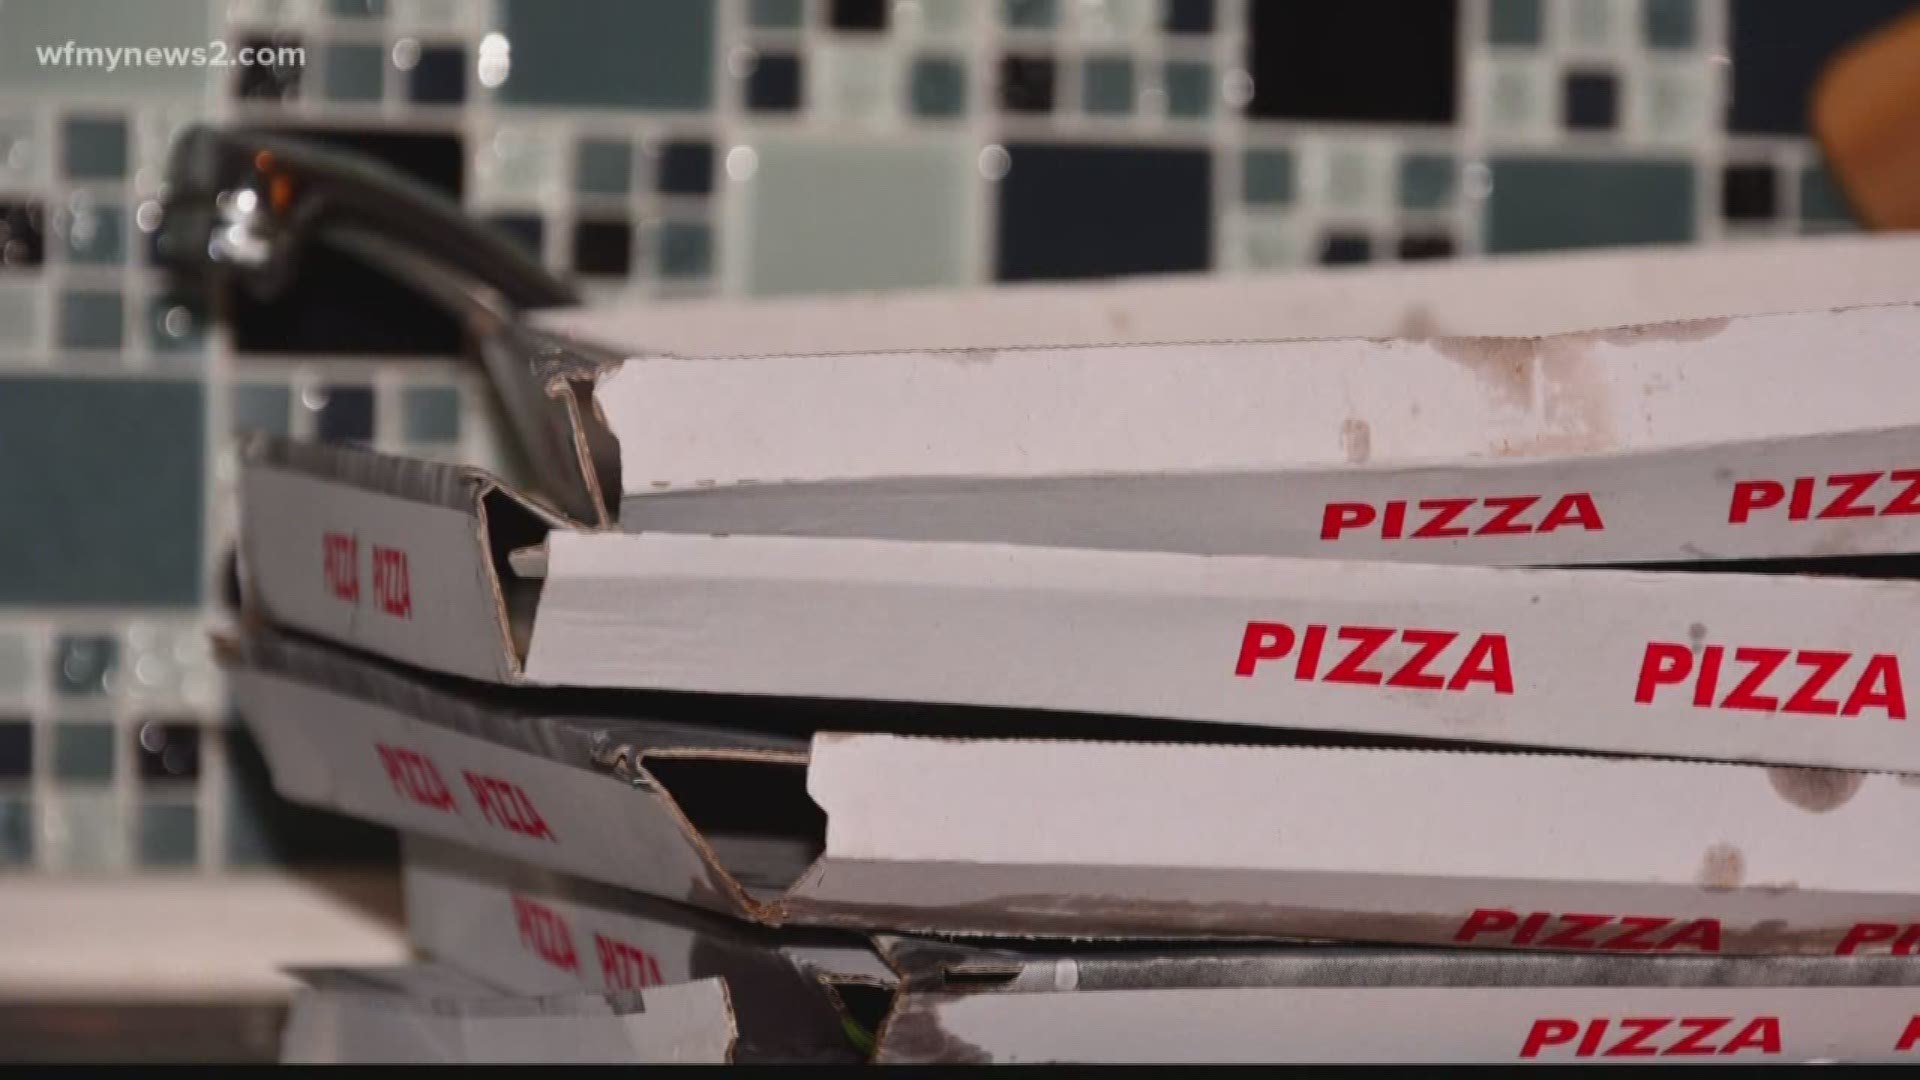 The fate of your pizza box depends on where you live.